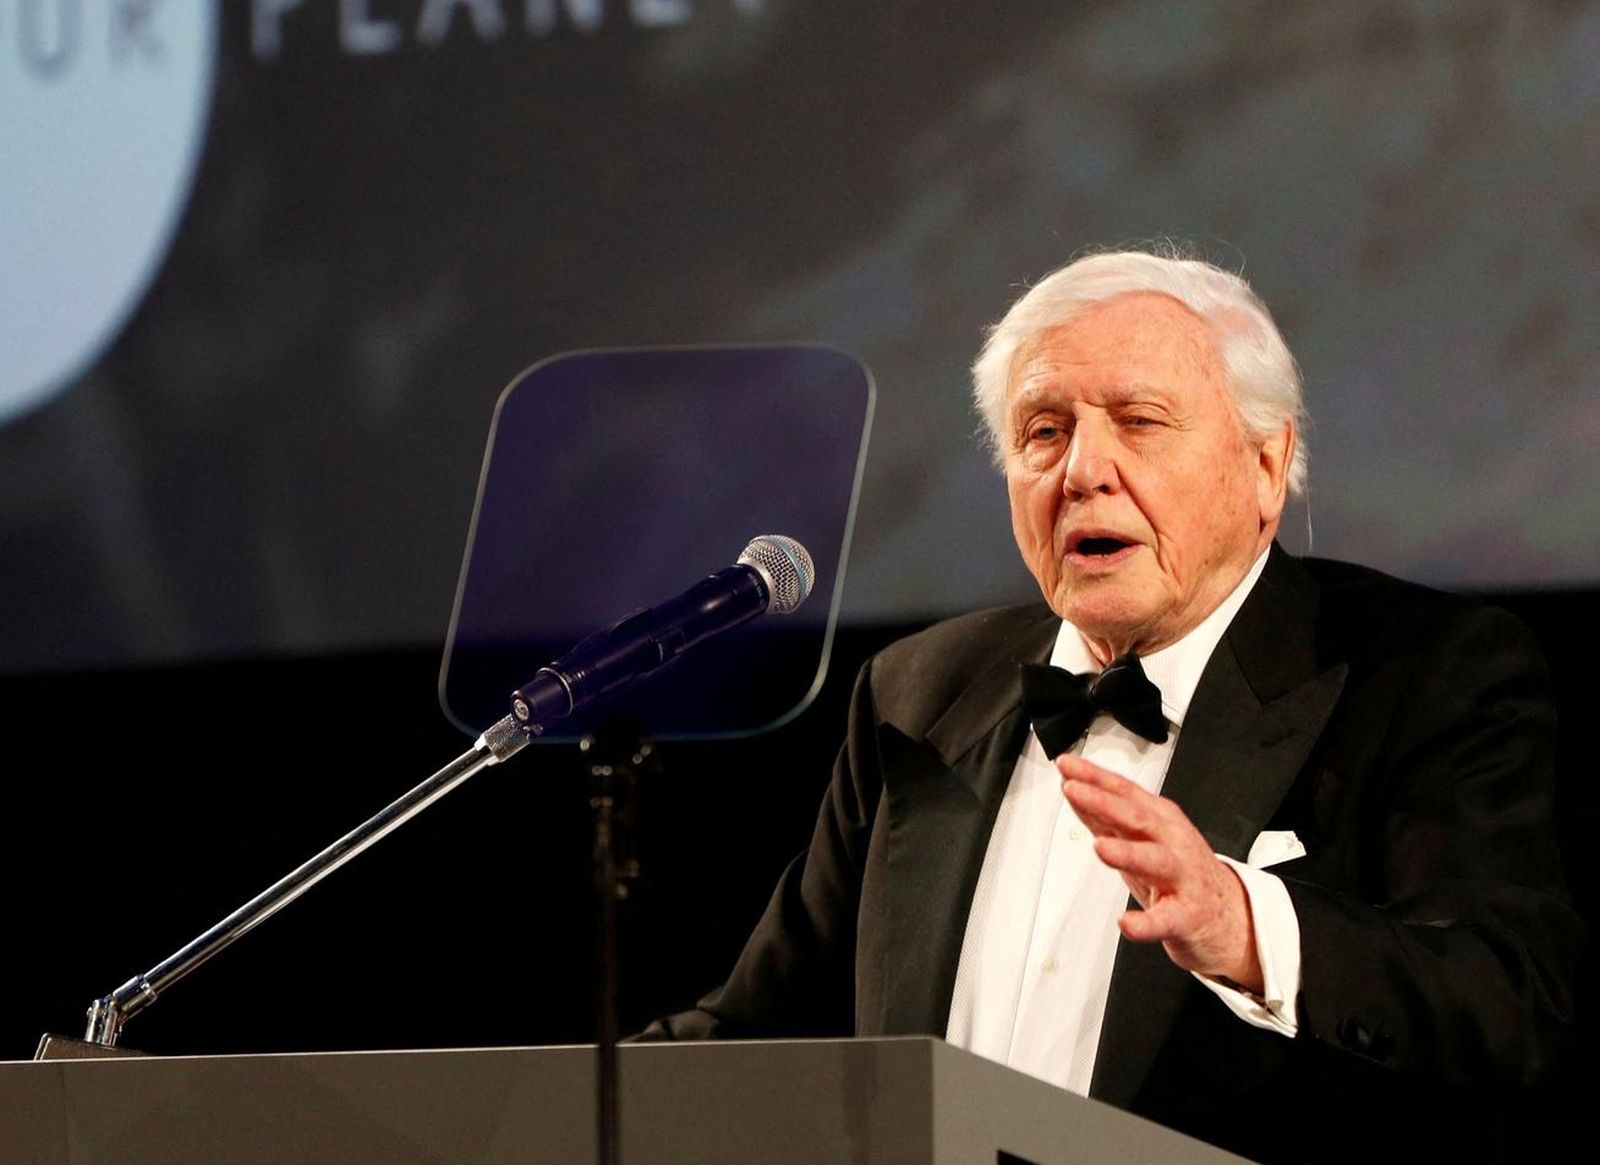 FILE PHOTO: British naturalist David Attenborough gives a speech during the global premiere of Netflix's "Our Planet" at the Natural History Museum in London, Britain April 4, 2019. REUTERS/John Sibley/Pool/File Photo Photo: John Sibley/REUTERS